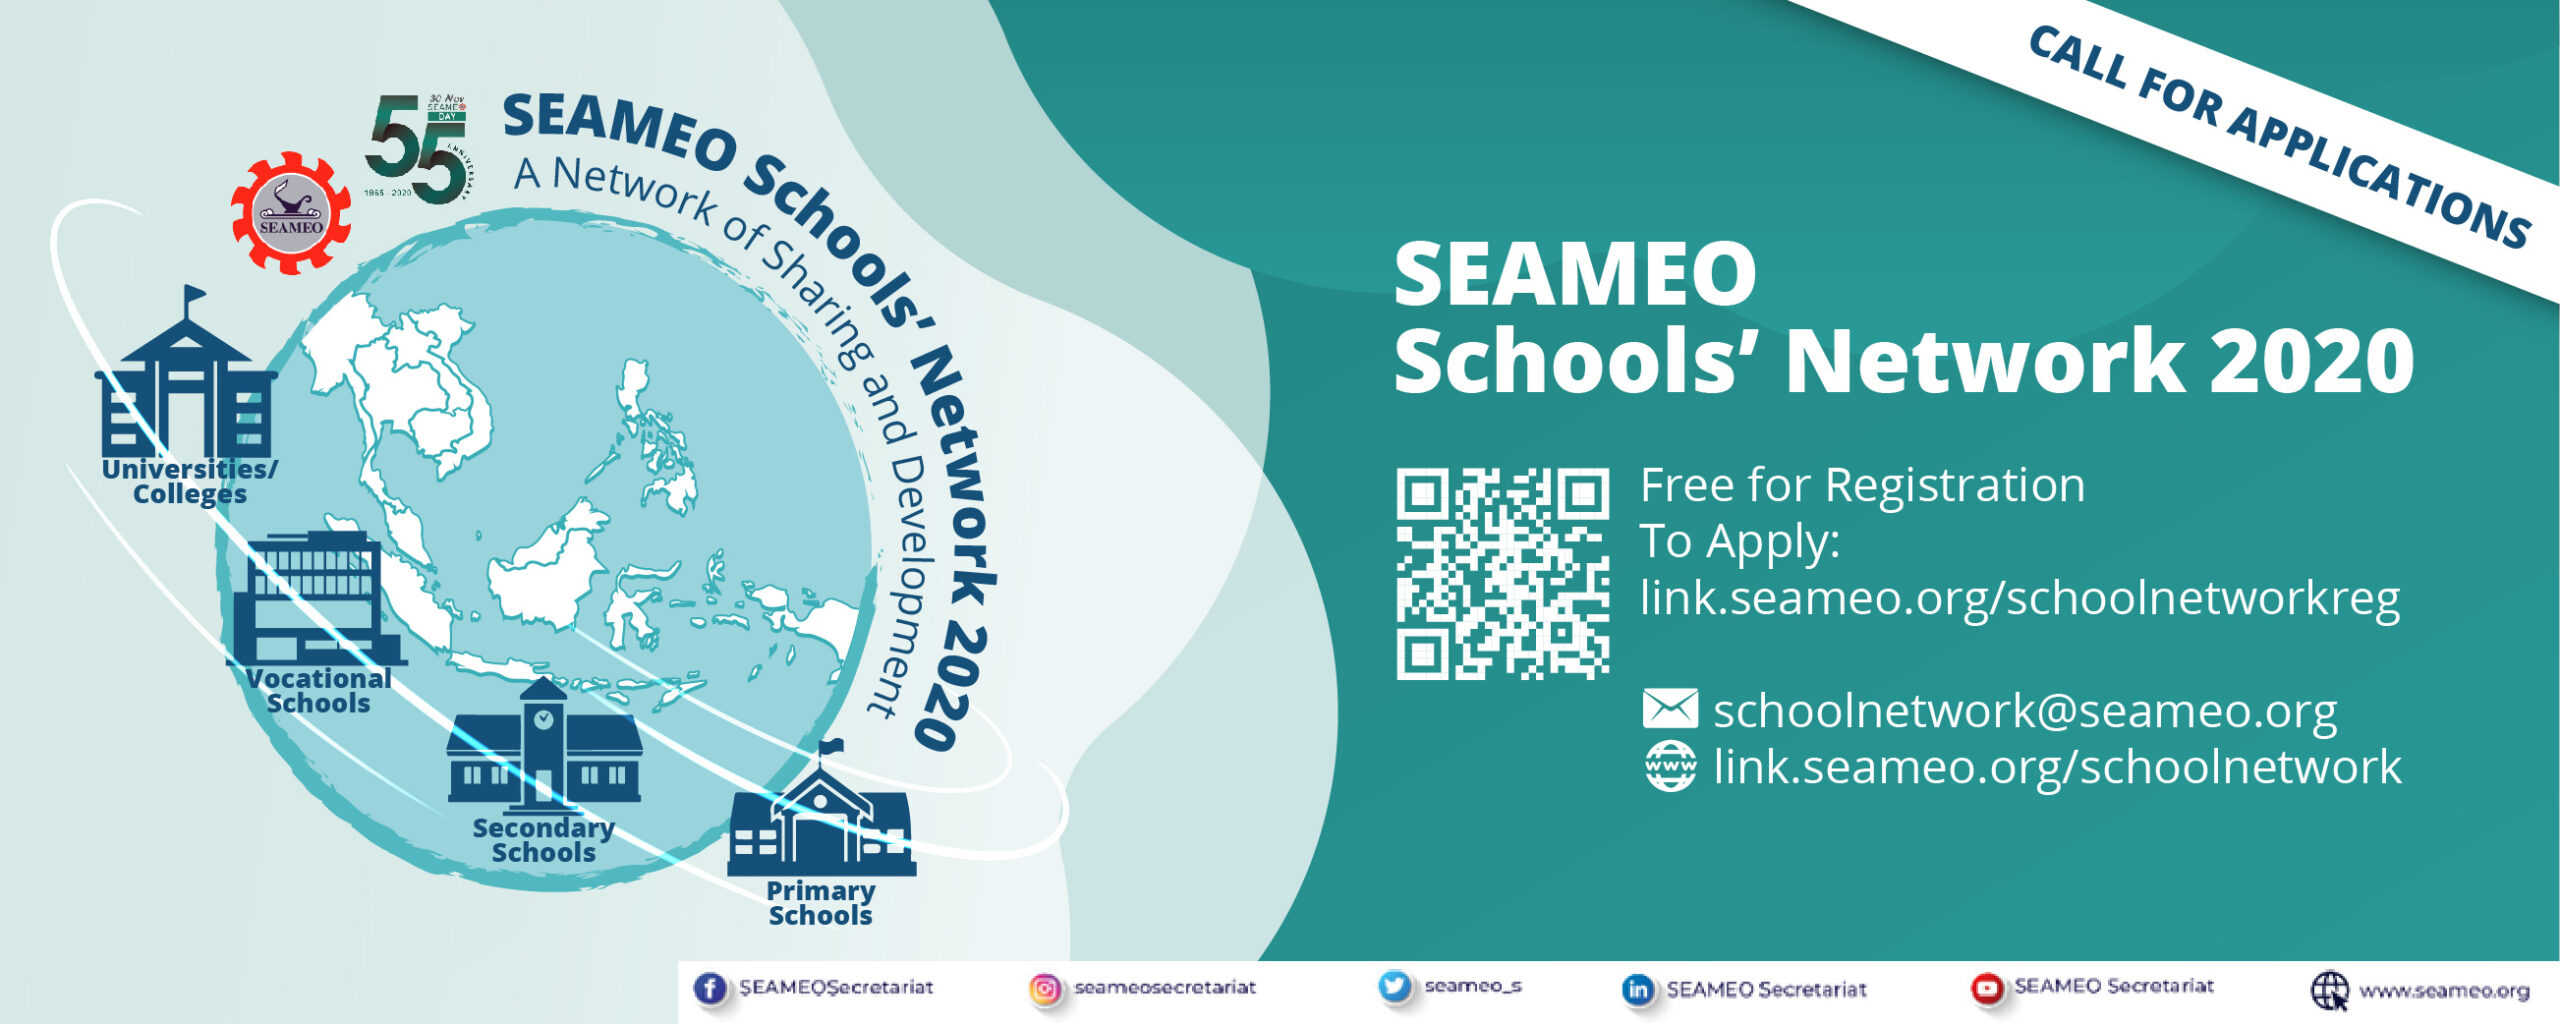 Call for Applications for the SEAMEO Schools’ Network in 2020